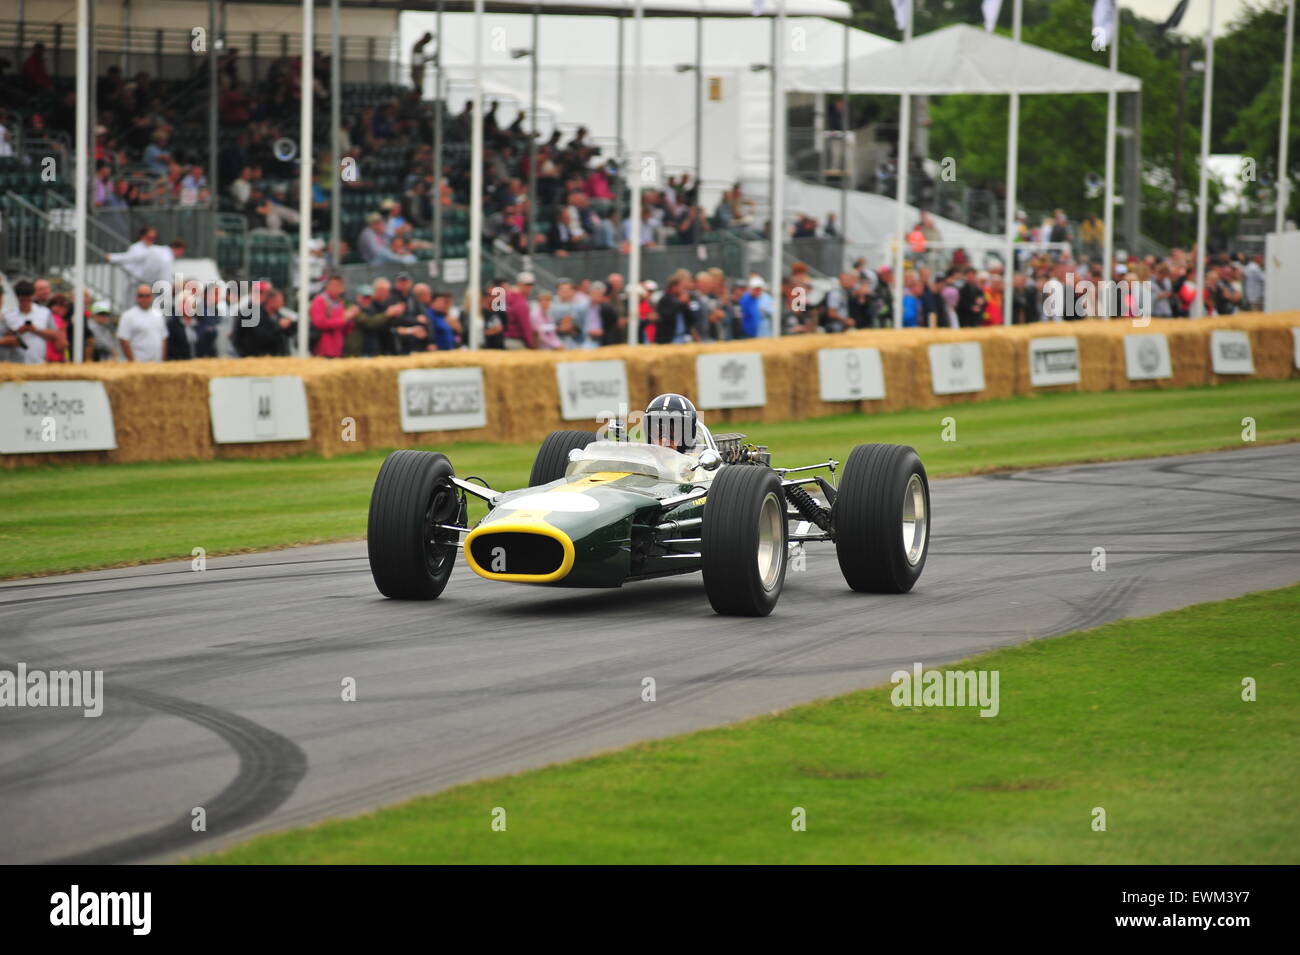 Damon Hill in a Lotus 49 driven by his father at the Goodwood Festival of Speed. Racing drivers, celebrities and thousands of members of the public attended the Goodwood Festival of Speed to see modern and old racing cars and bikes in action. Stock Photo